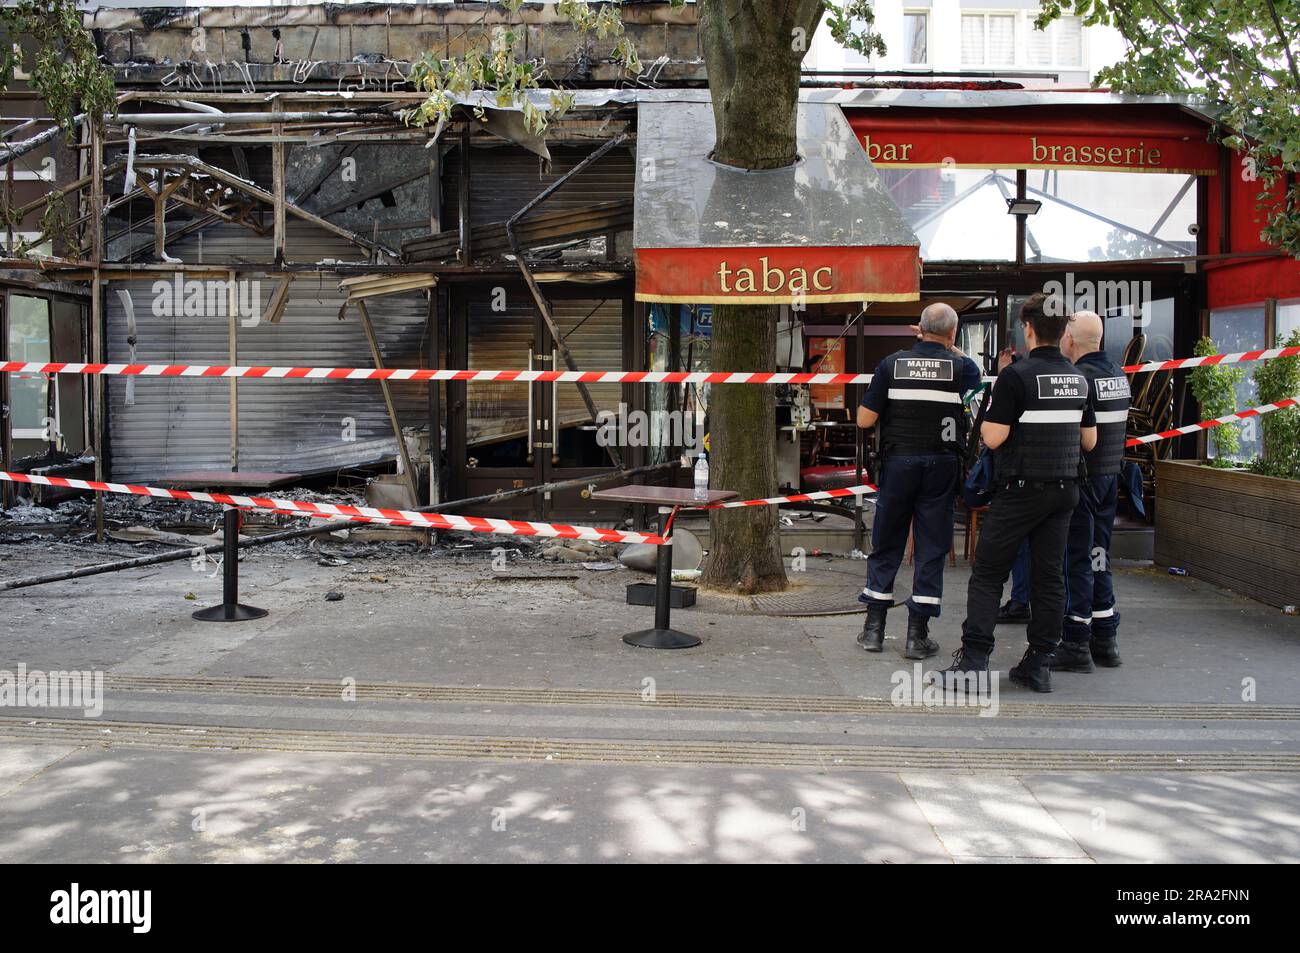 The Marie de Paris and French Police look at a café that has been attacked after a third night of violence and riots over police killing of a teenager, Le Village des Fêtes Café, Rue Louise Thuliez, Place de Fêtes, 75019, Paris, France - 30 June 2023 Stock Photo